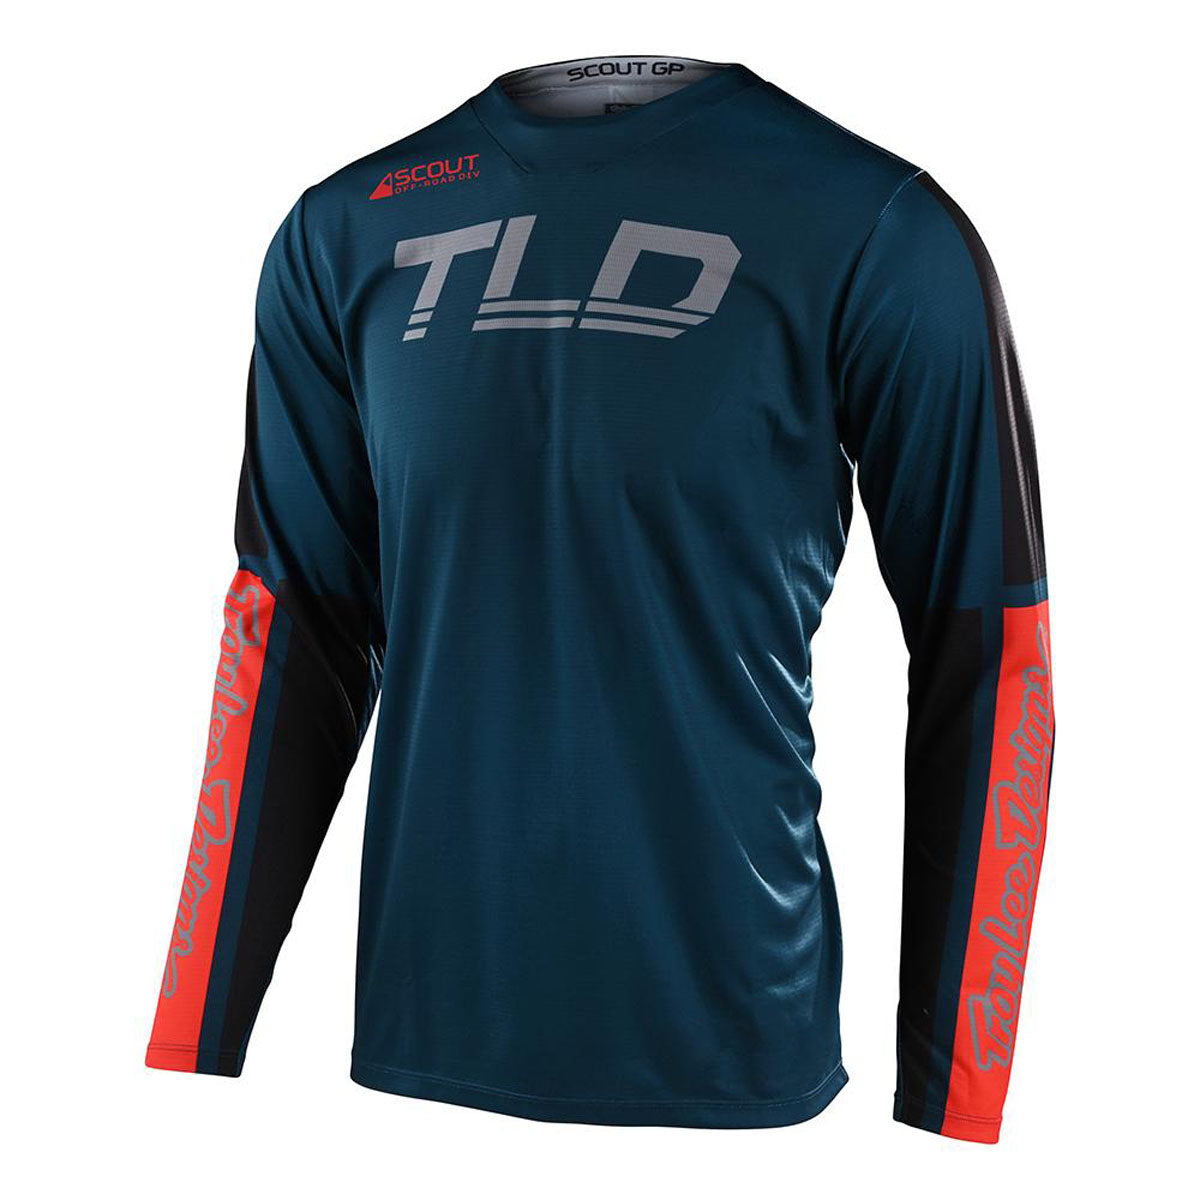 Troy Lee Designs Scout GP Jersey - Recon - Marine